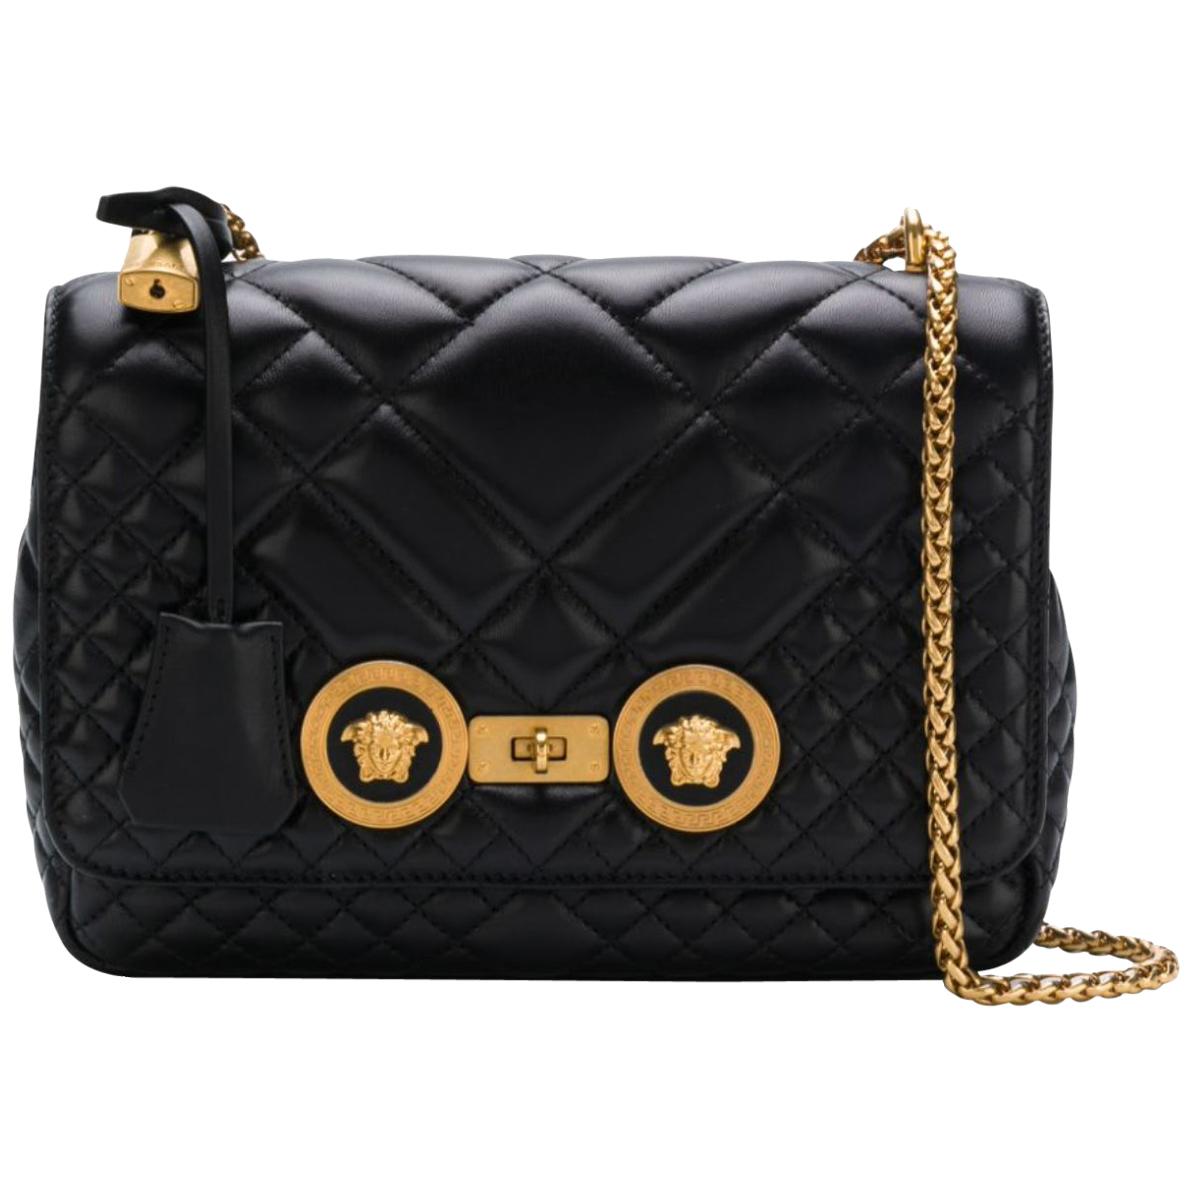 MARKESE Matalasse Black Quilted Leather Shoulder Bag Chain Gold Turnlock